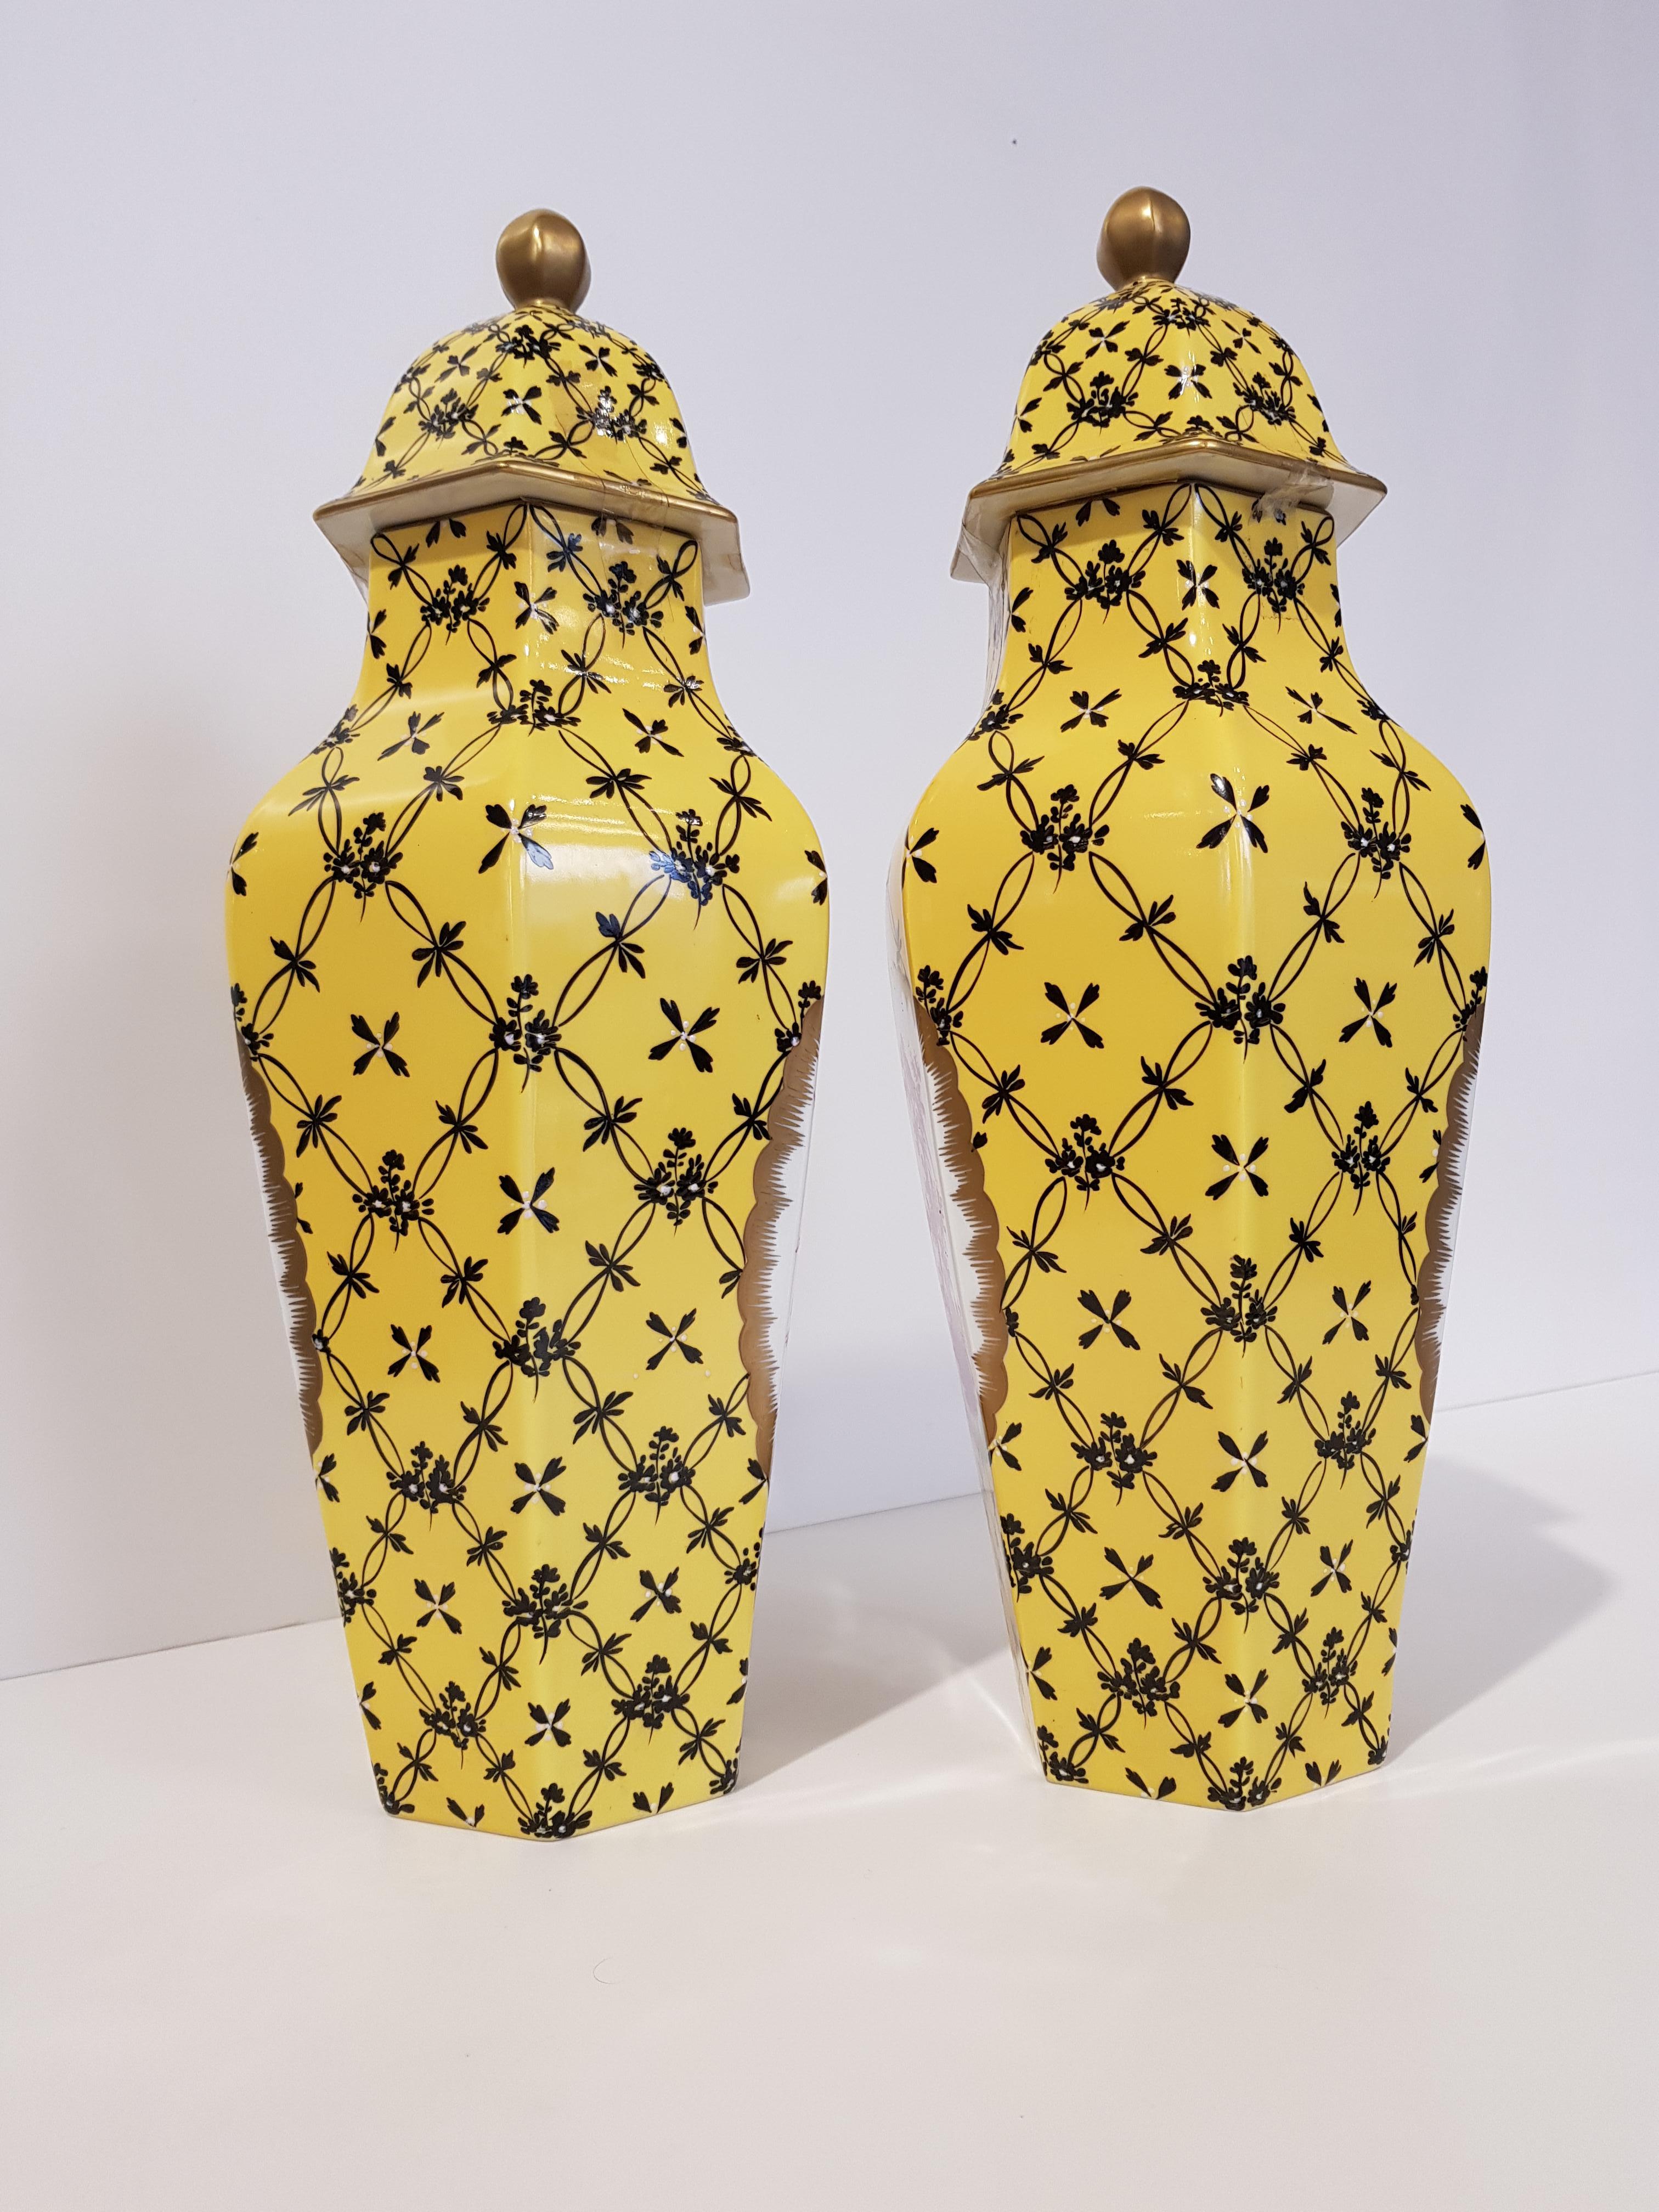 Pair of Baroque Style Black and Yellow German Vases with Floral Pattern, 1965

Pair of German porcelain vases from Dresden.
These vases are finely hand painted with particular floral / geometric motifs in black that stand out against the particular